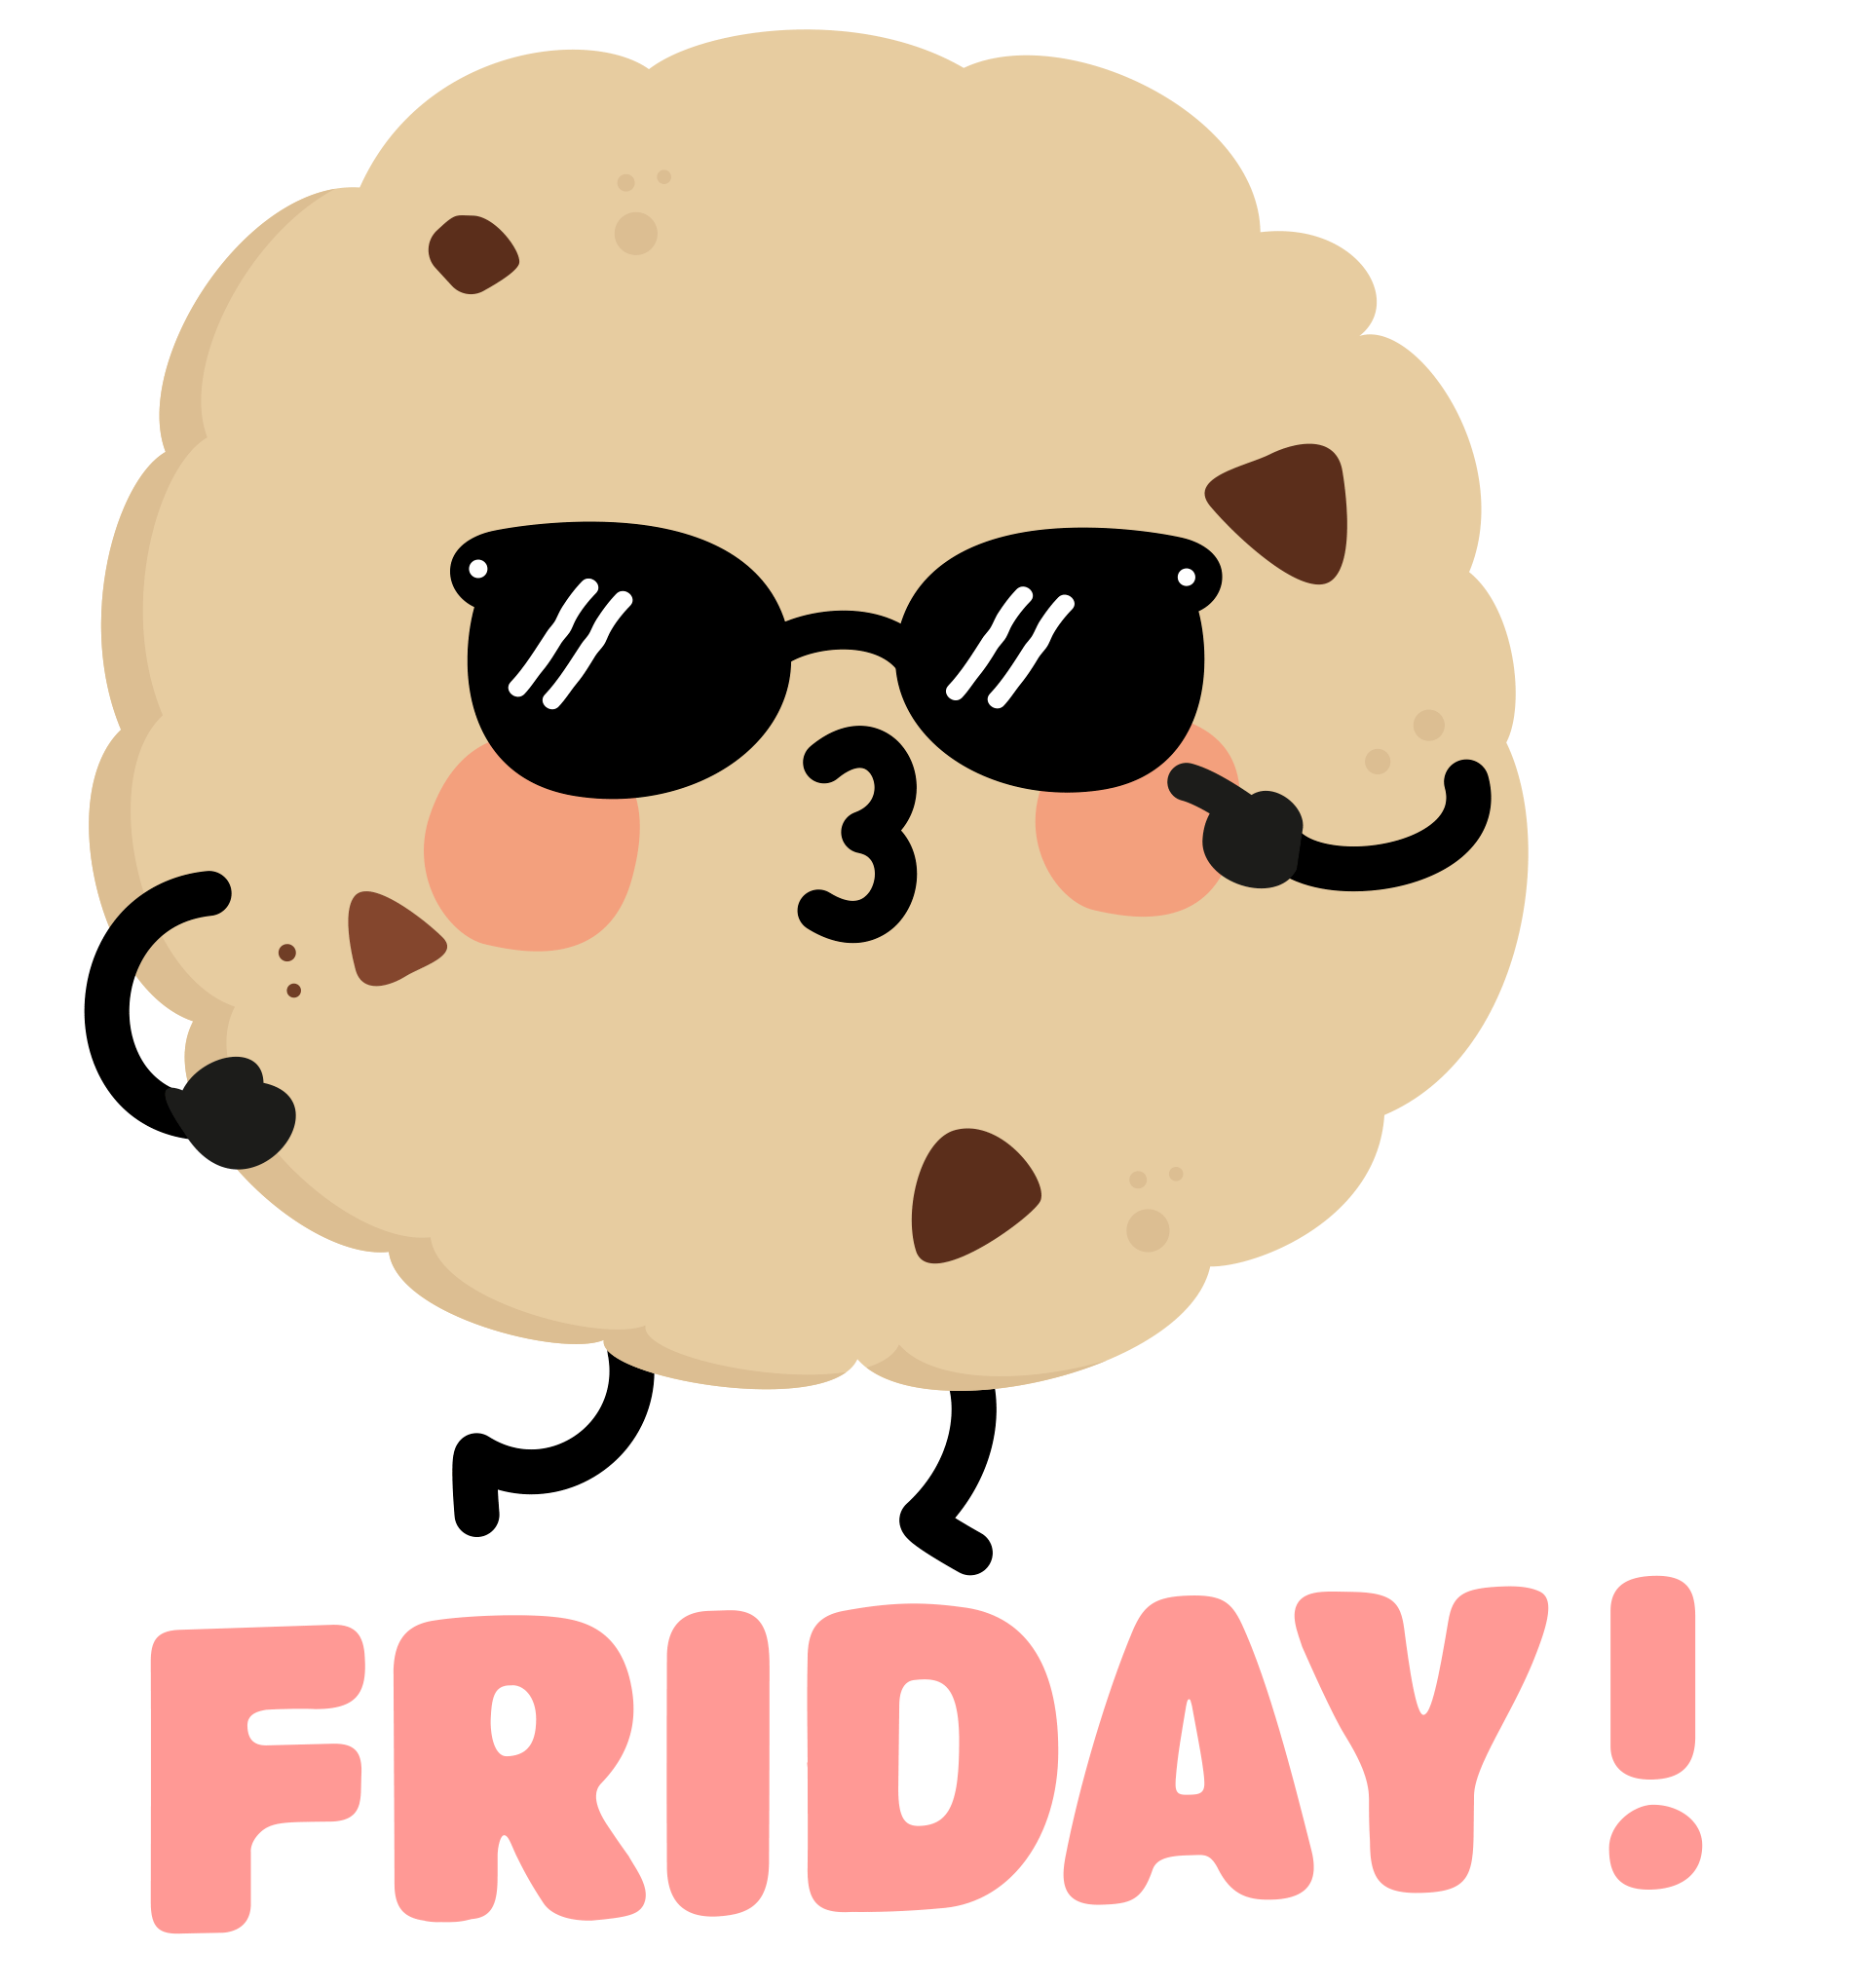 Friday clipart happy friday, Picture #1163098 friday clipart.